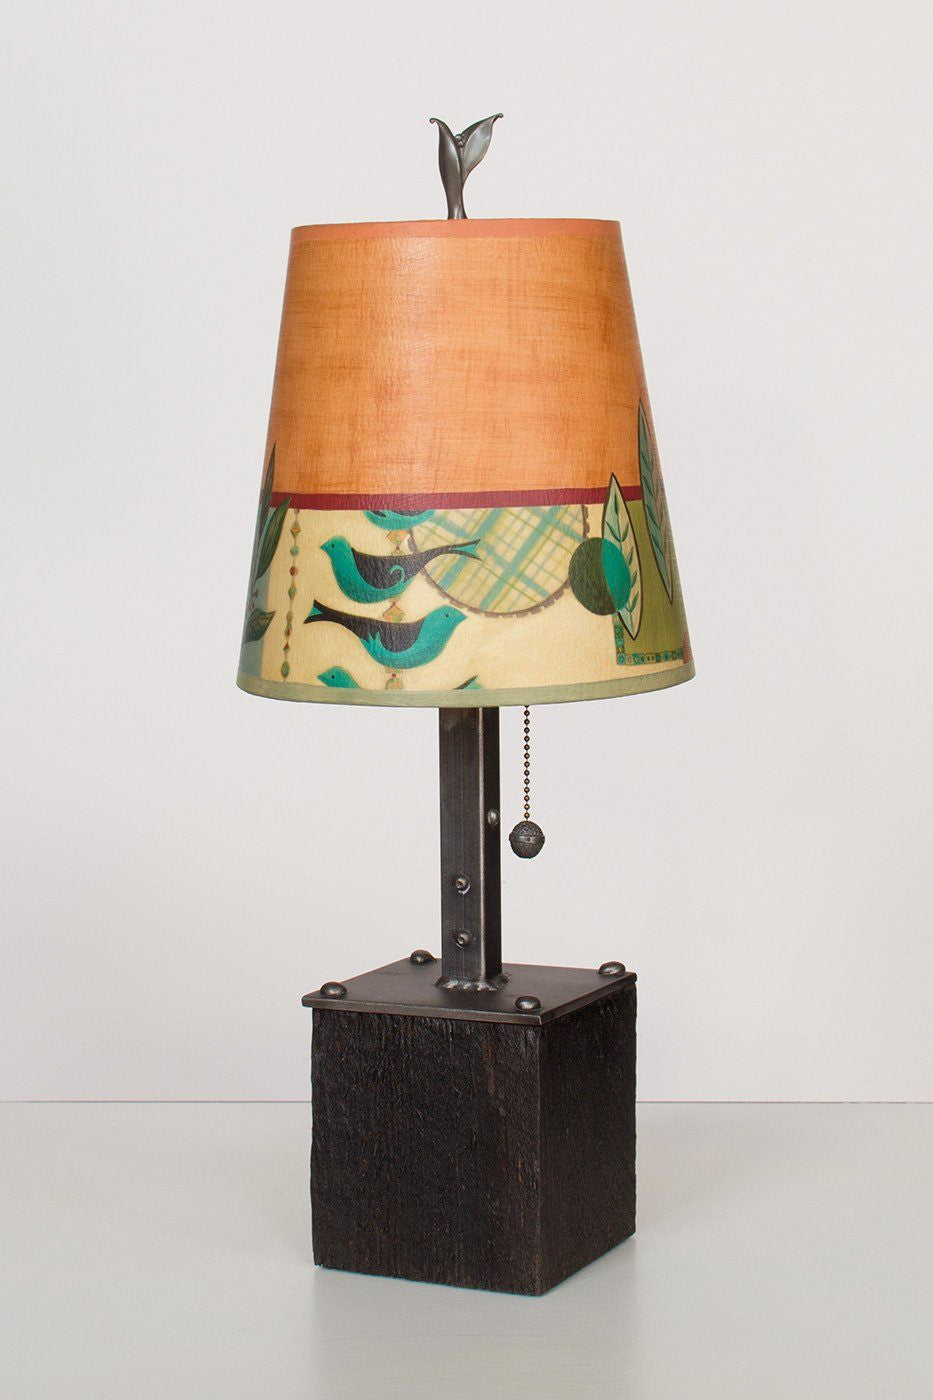 Janna Ugone &amp; Co Table Lamps Steel Table Lamp on Reclaimed Wood with Small Drum Shade in New Capri Spice